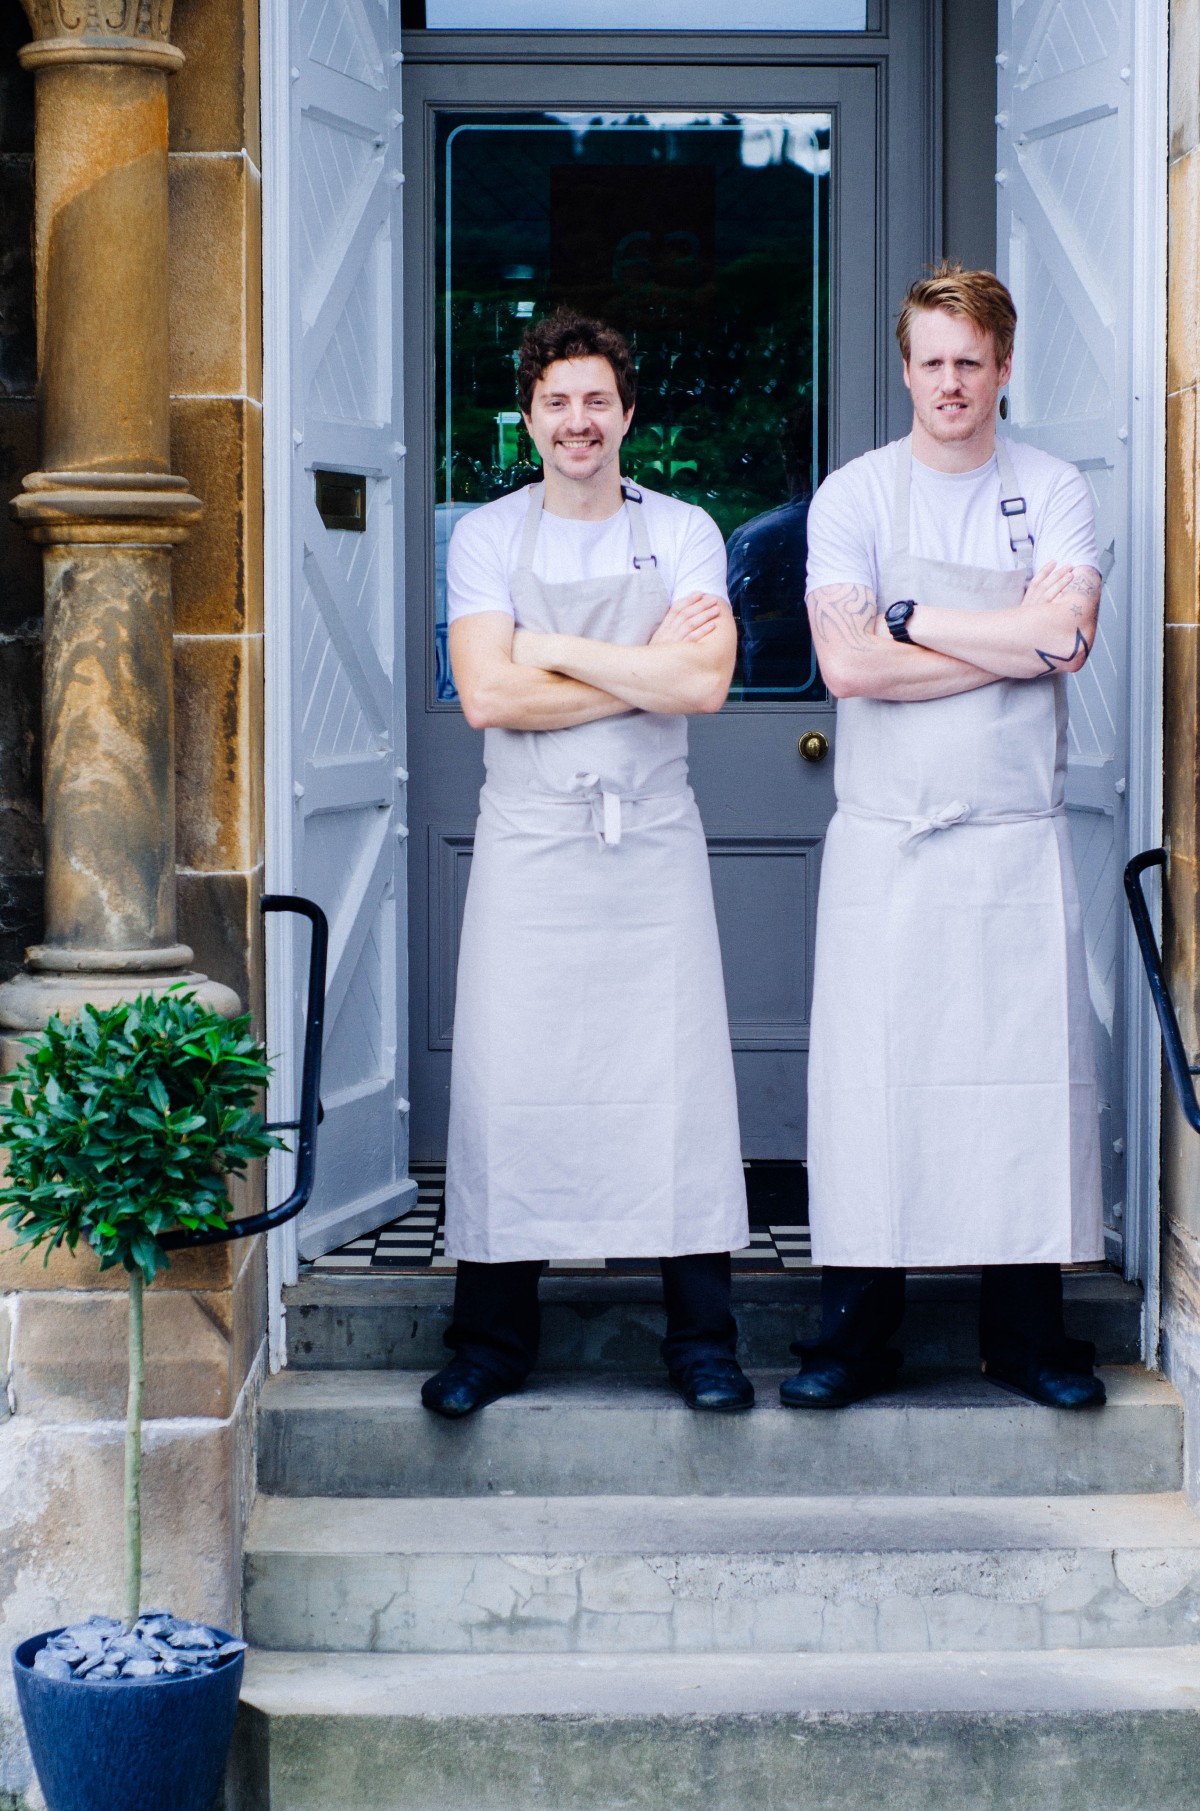 Graeme Pallister and Lee Steele are the superstar chefs behind the delicious fine dining food available at 63 Tay Street.